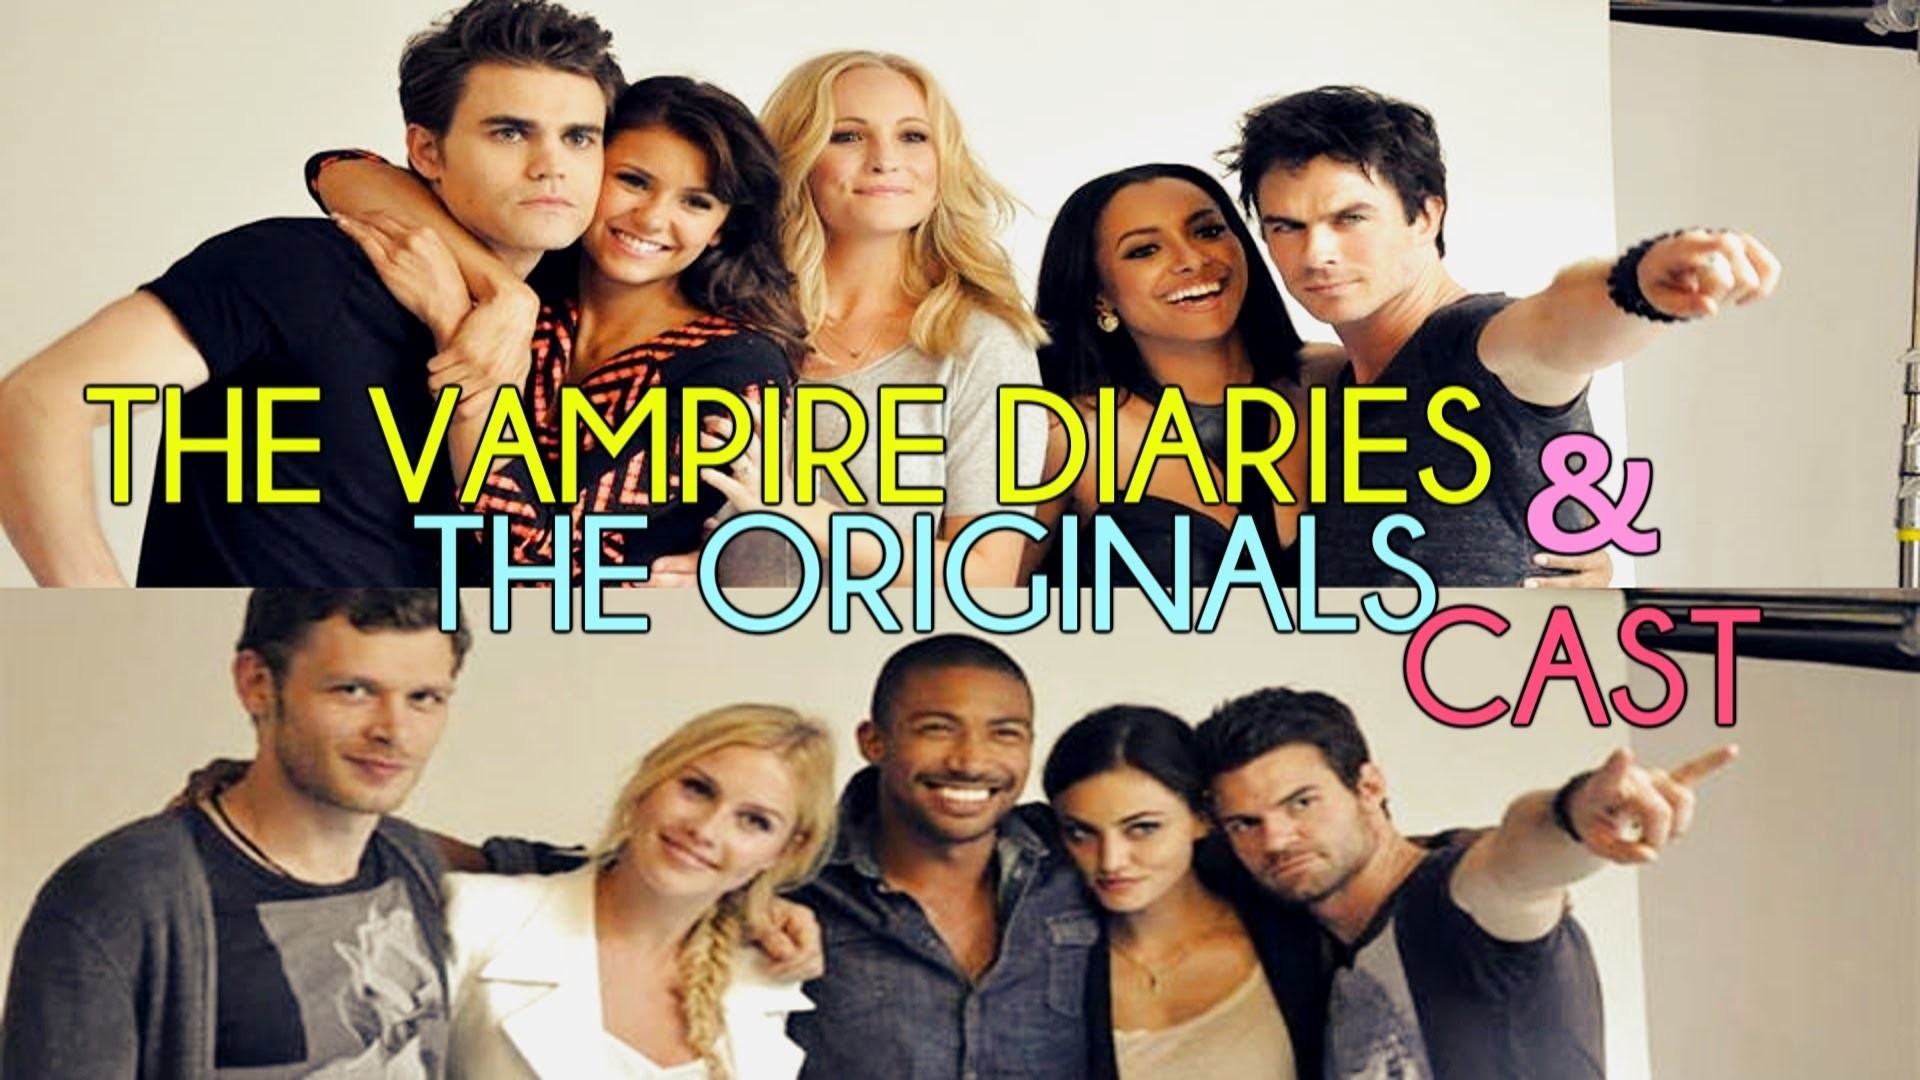 1920x1080 Best Of: The Vampire Diaries & The Originals Cast | Funny Moments - YouTube